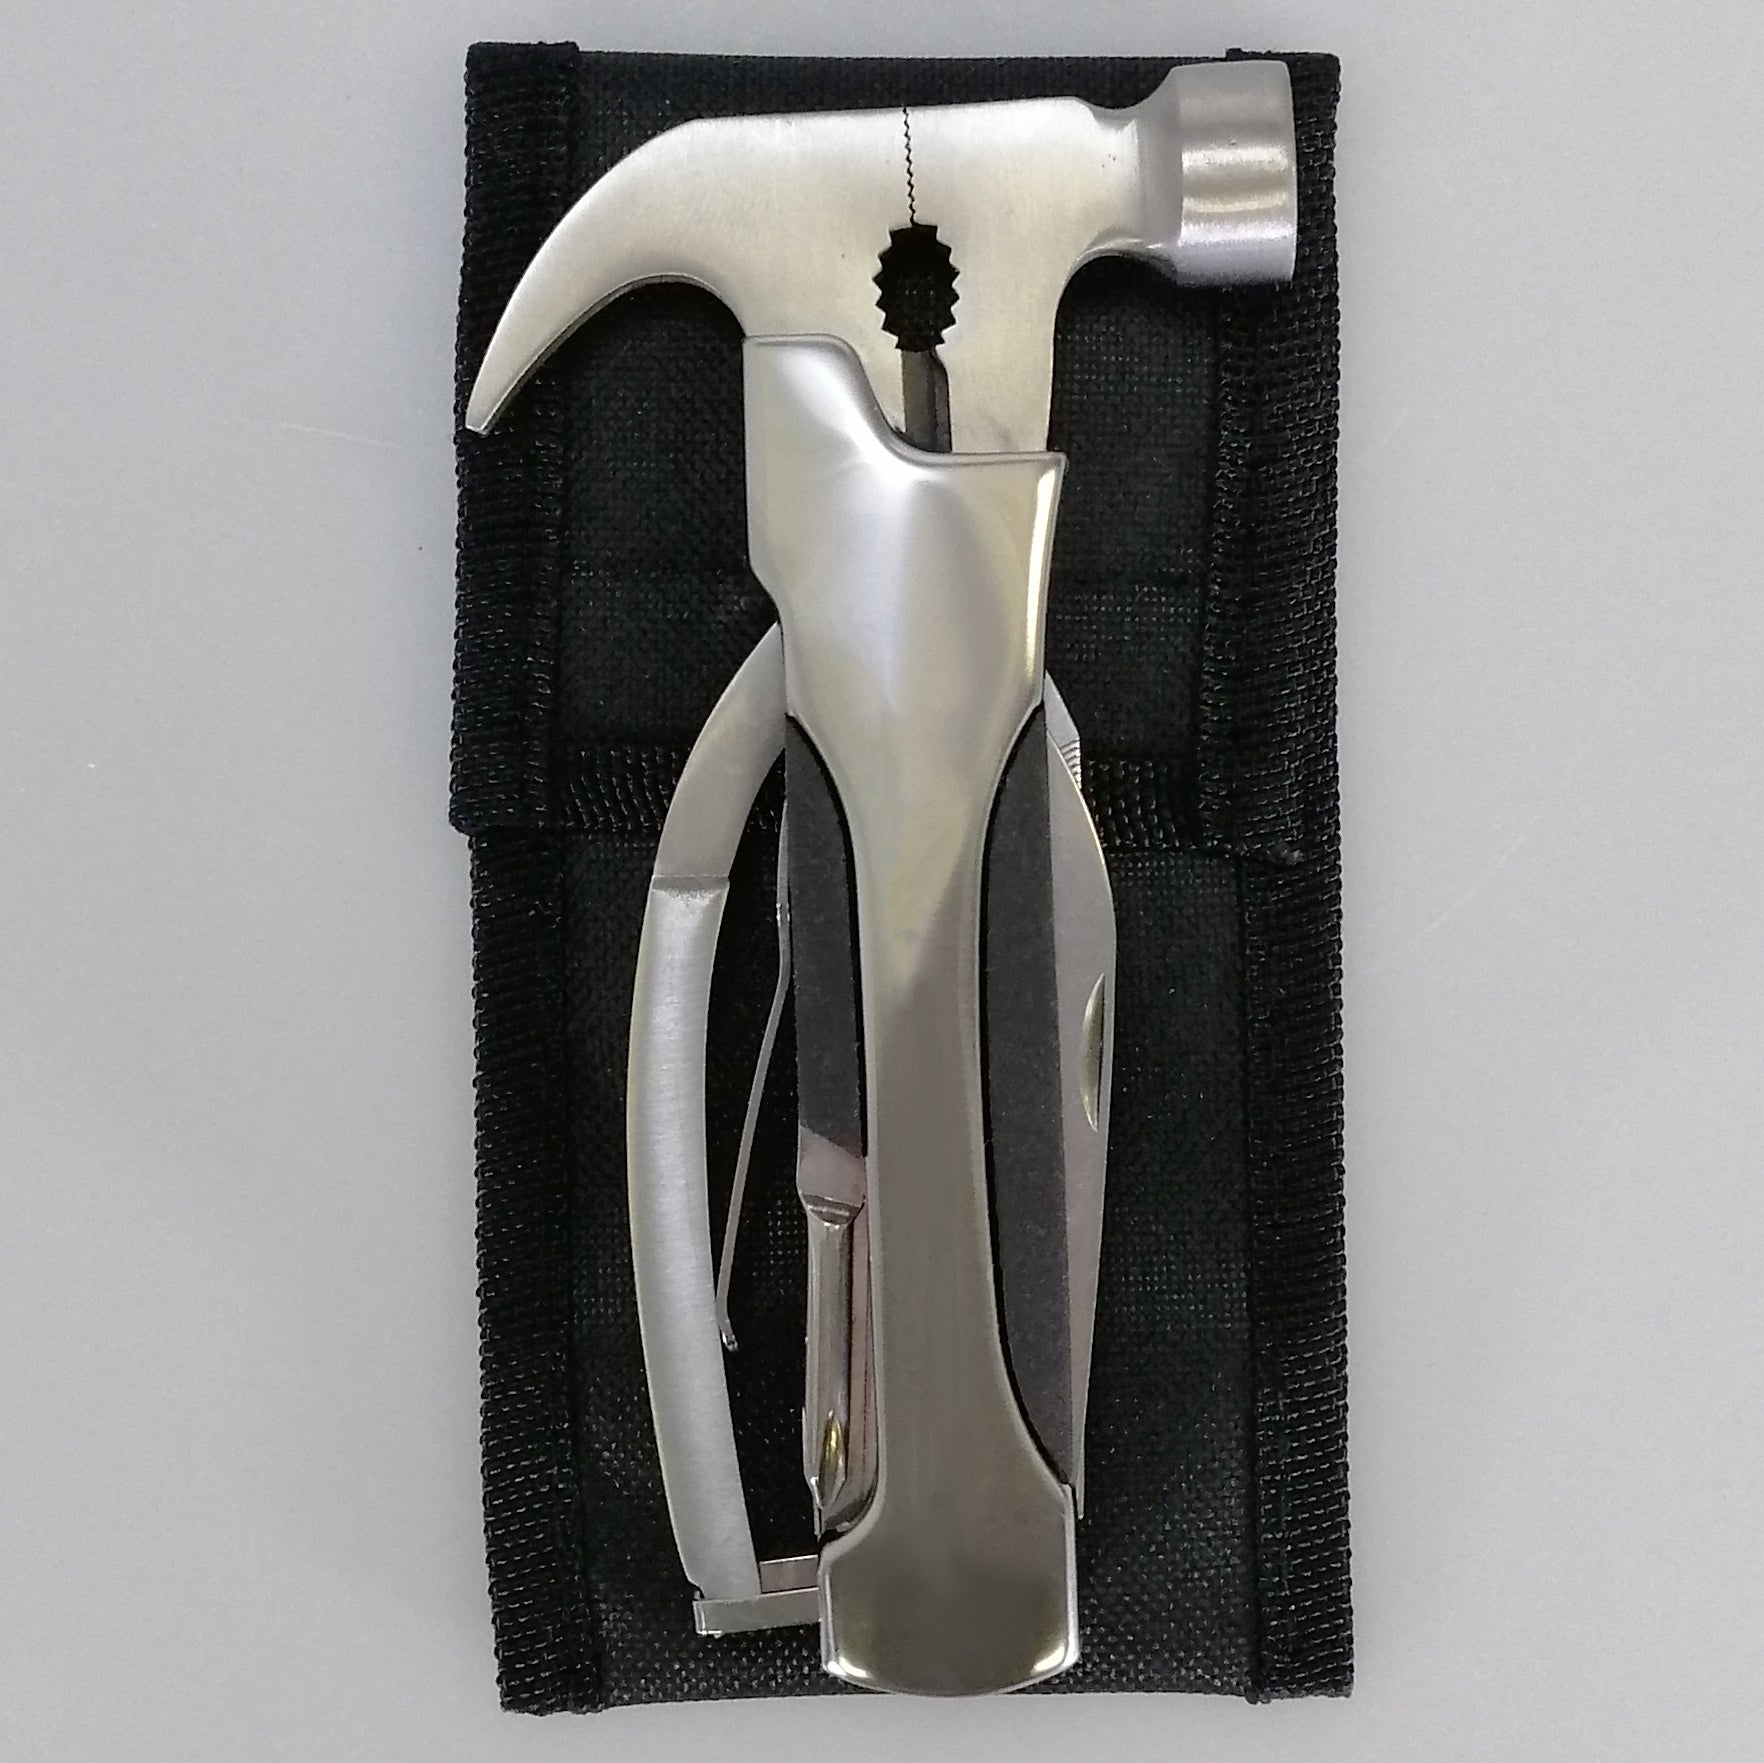 Gents Society - 9 Feature Multi-tool